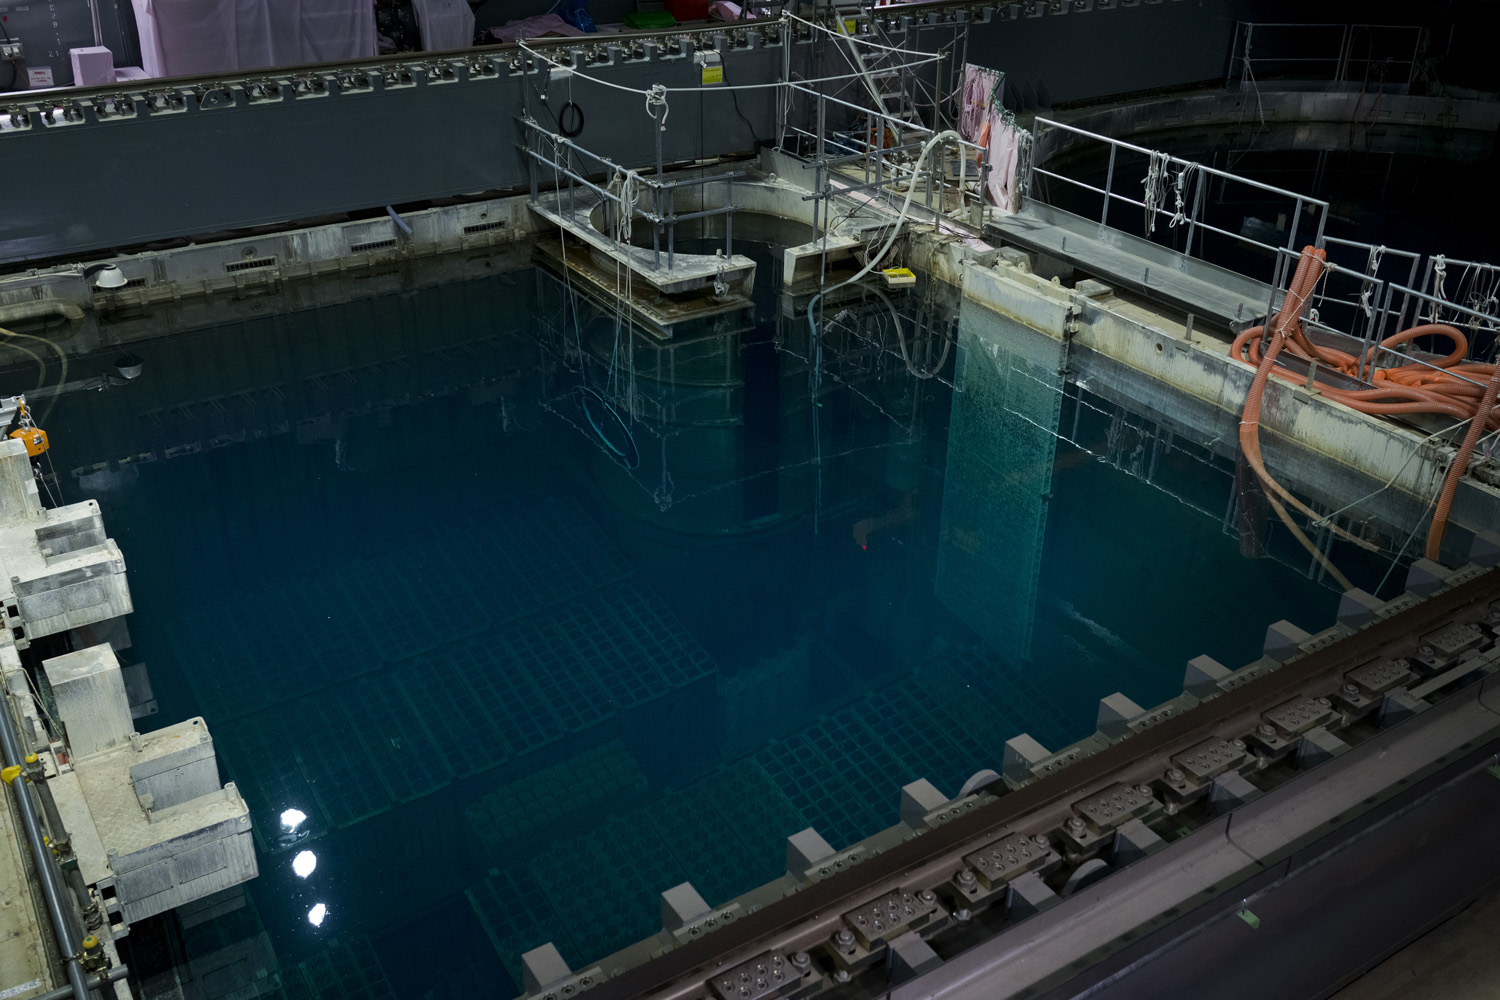 Japan, Okuma, 2014. TEPCO has made efforts to remove spent fuel rods from reactor 4. Reactor 4 did not melt down, but the 9.0 magnitude earthquake caused extensive damage to its foundations.